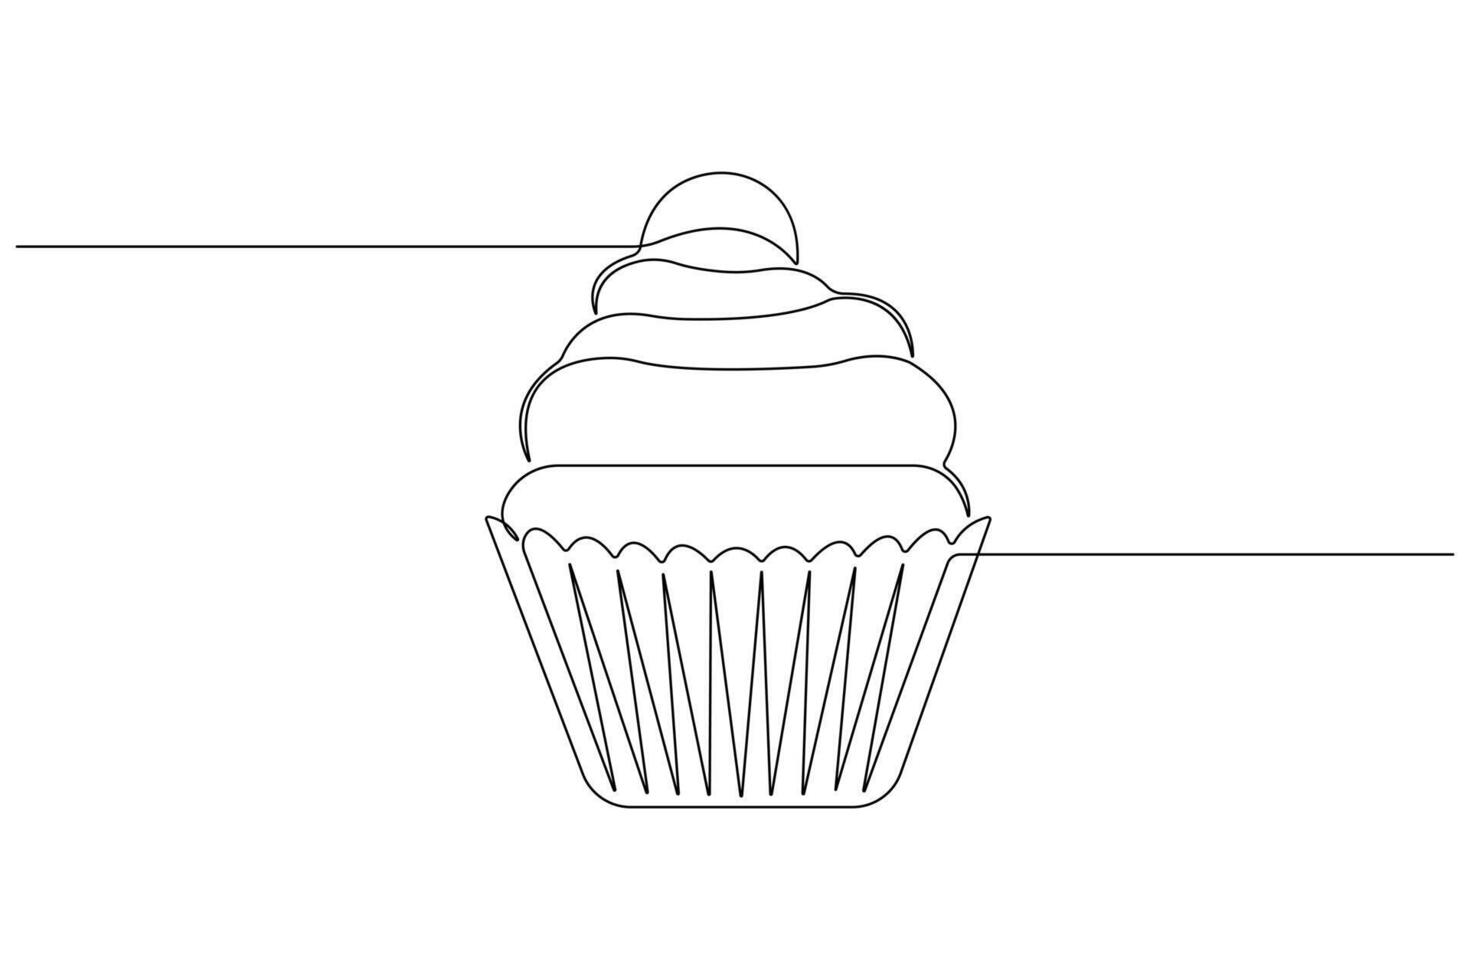 Continuous one line art drawing of birthday cake with cream, candle birthday party symbol of celebration vector